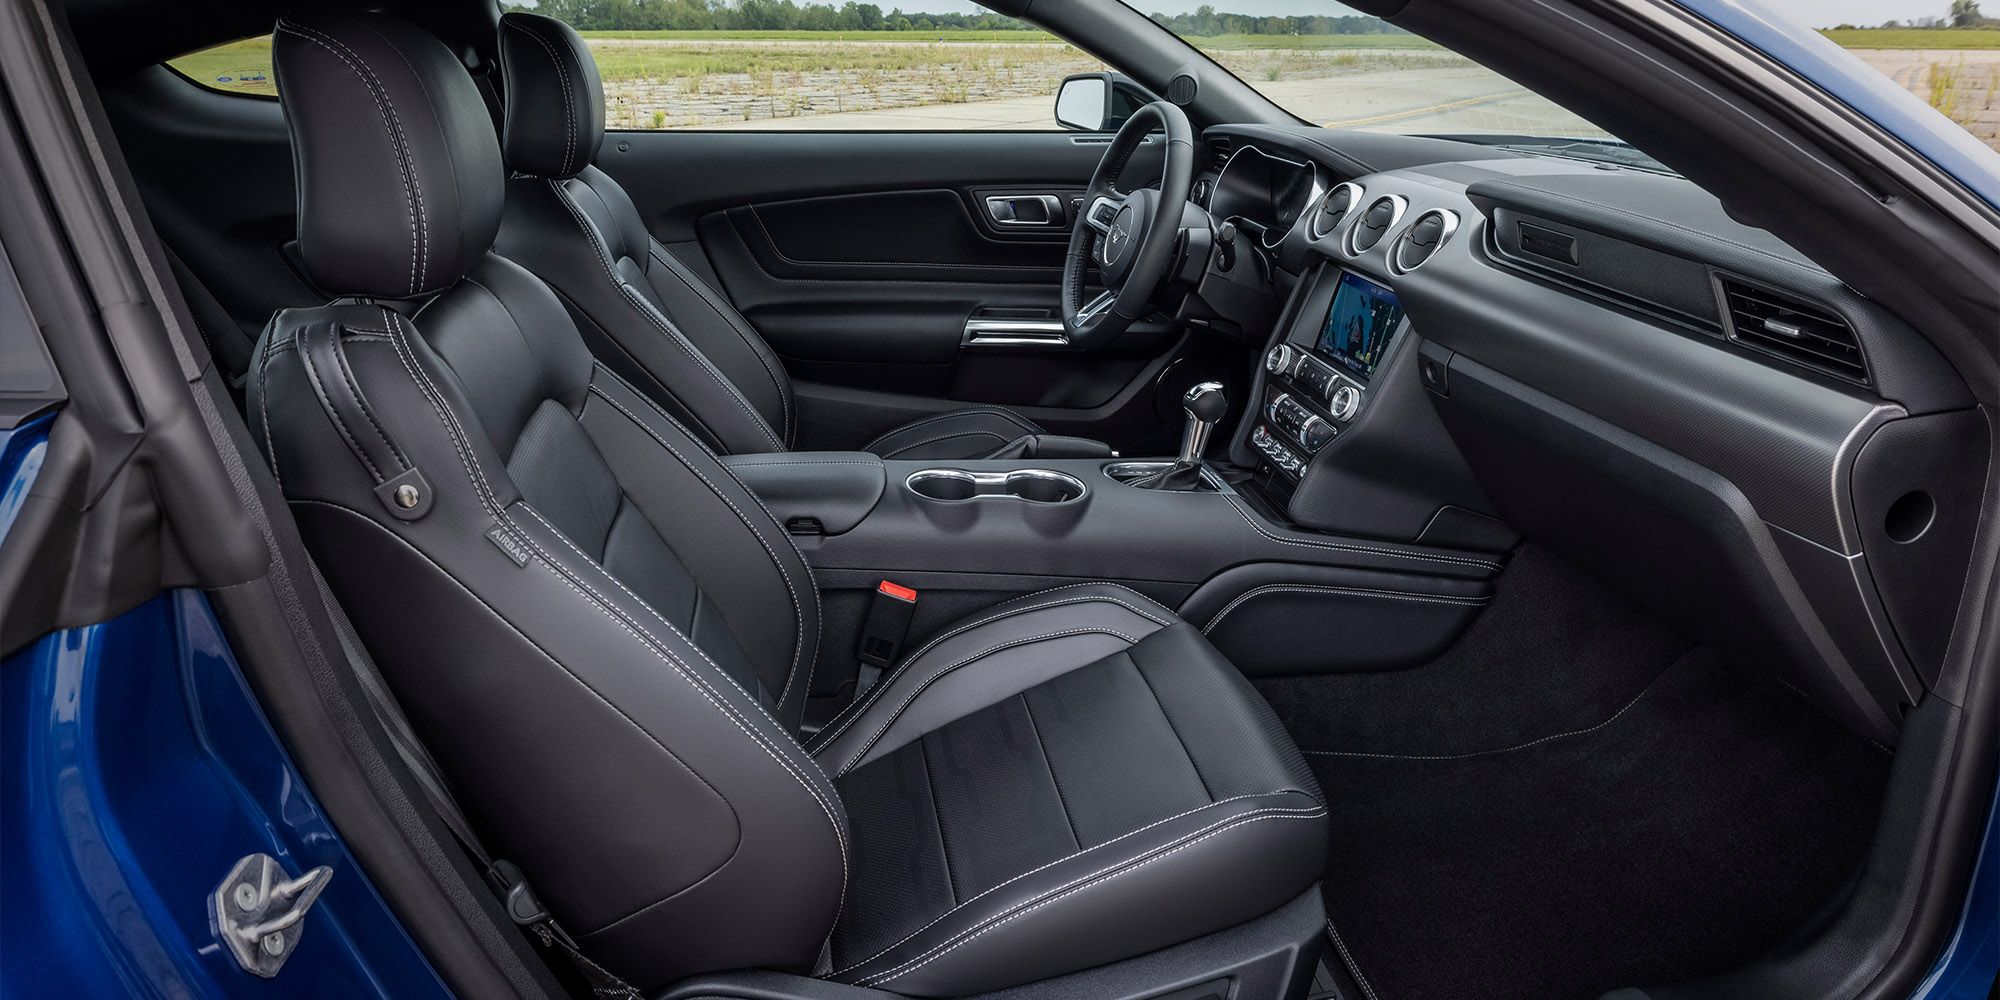 The interior of the 2022 Mustang GT, from the passenger side